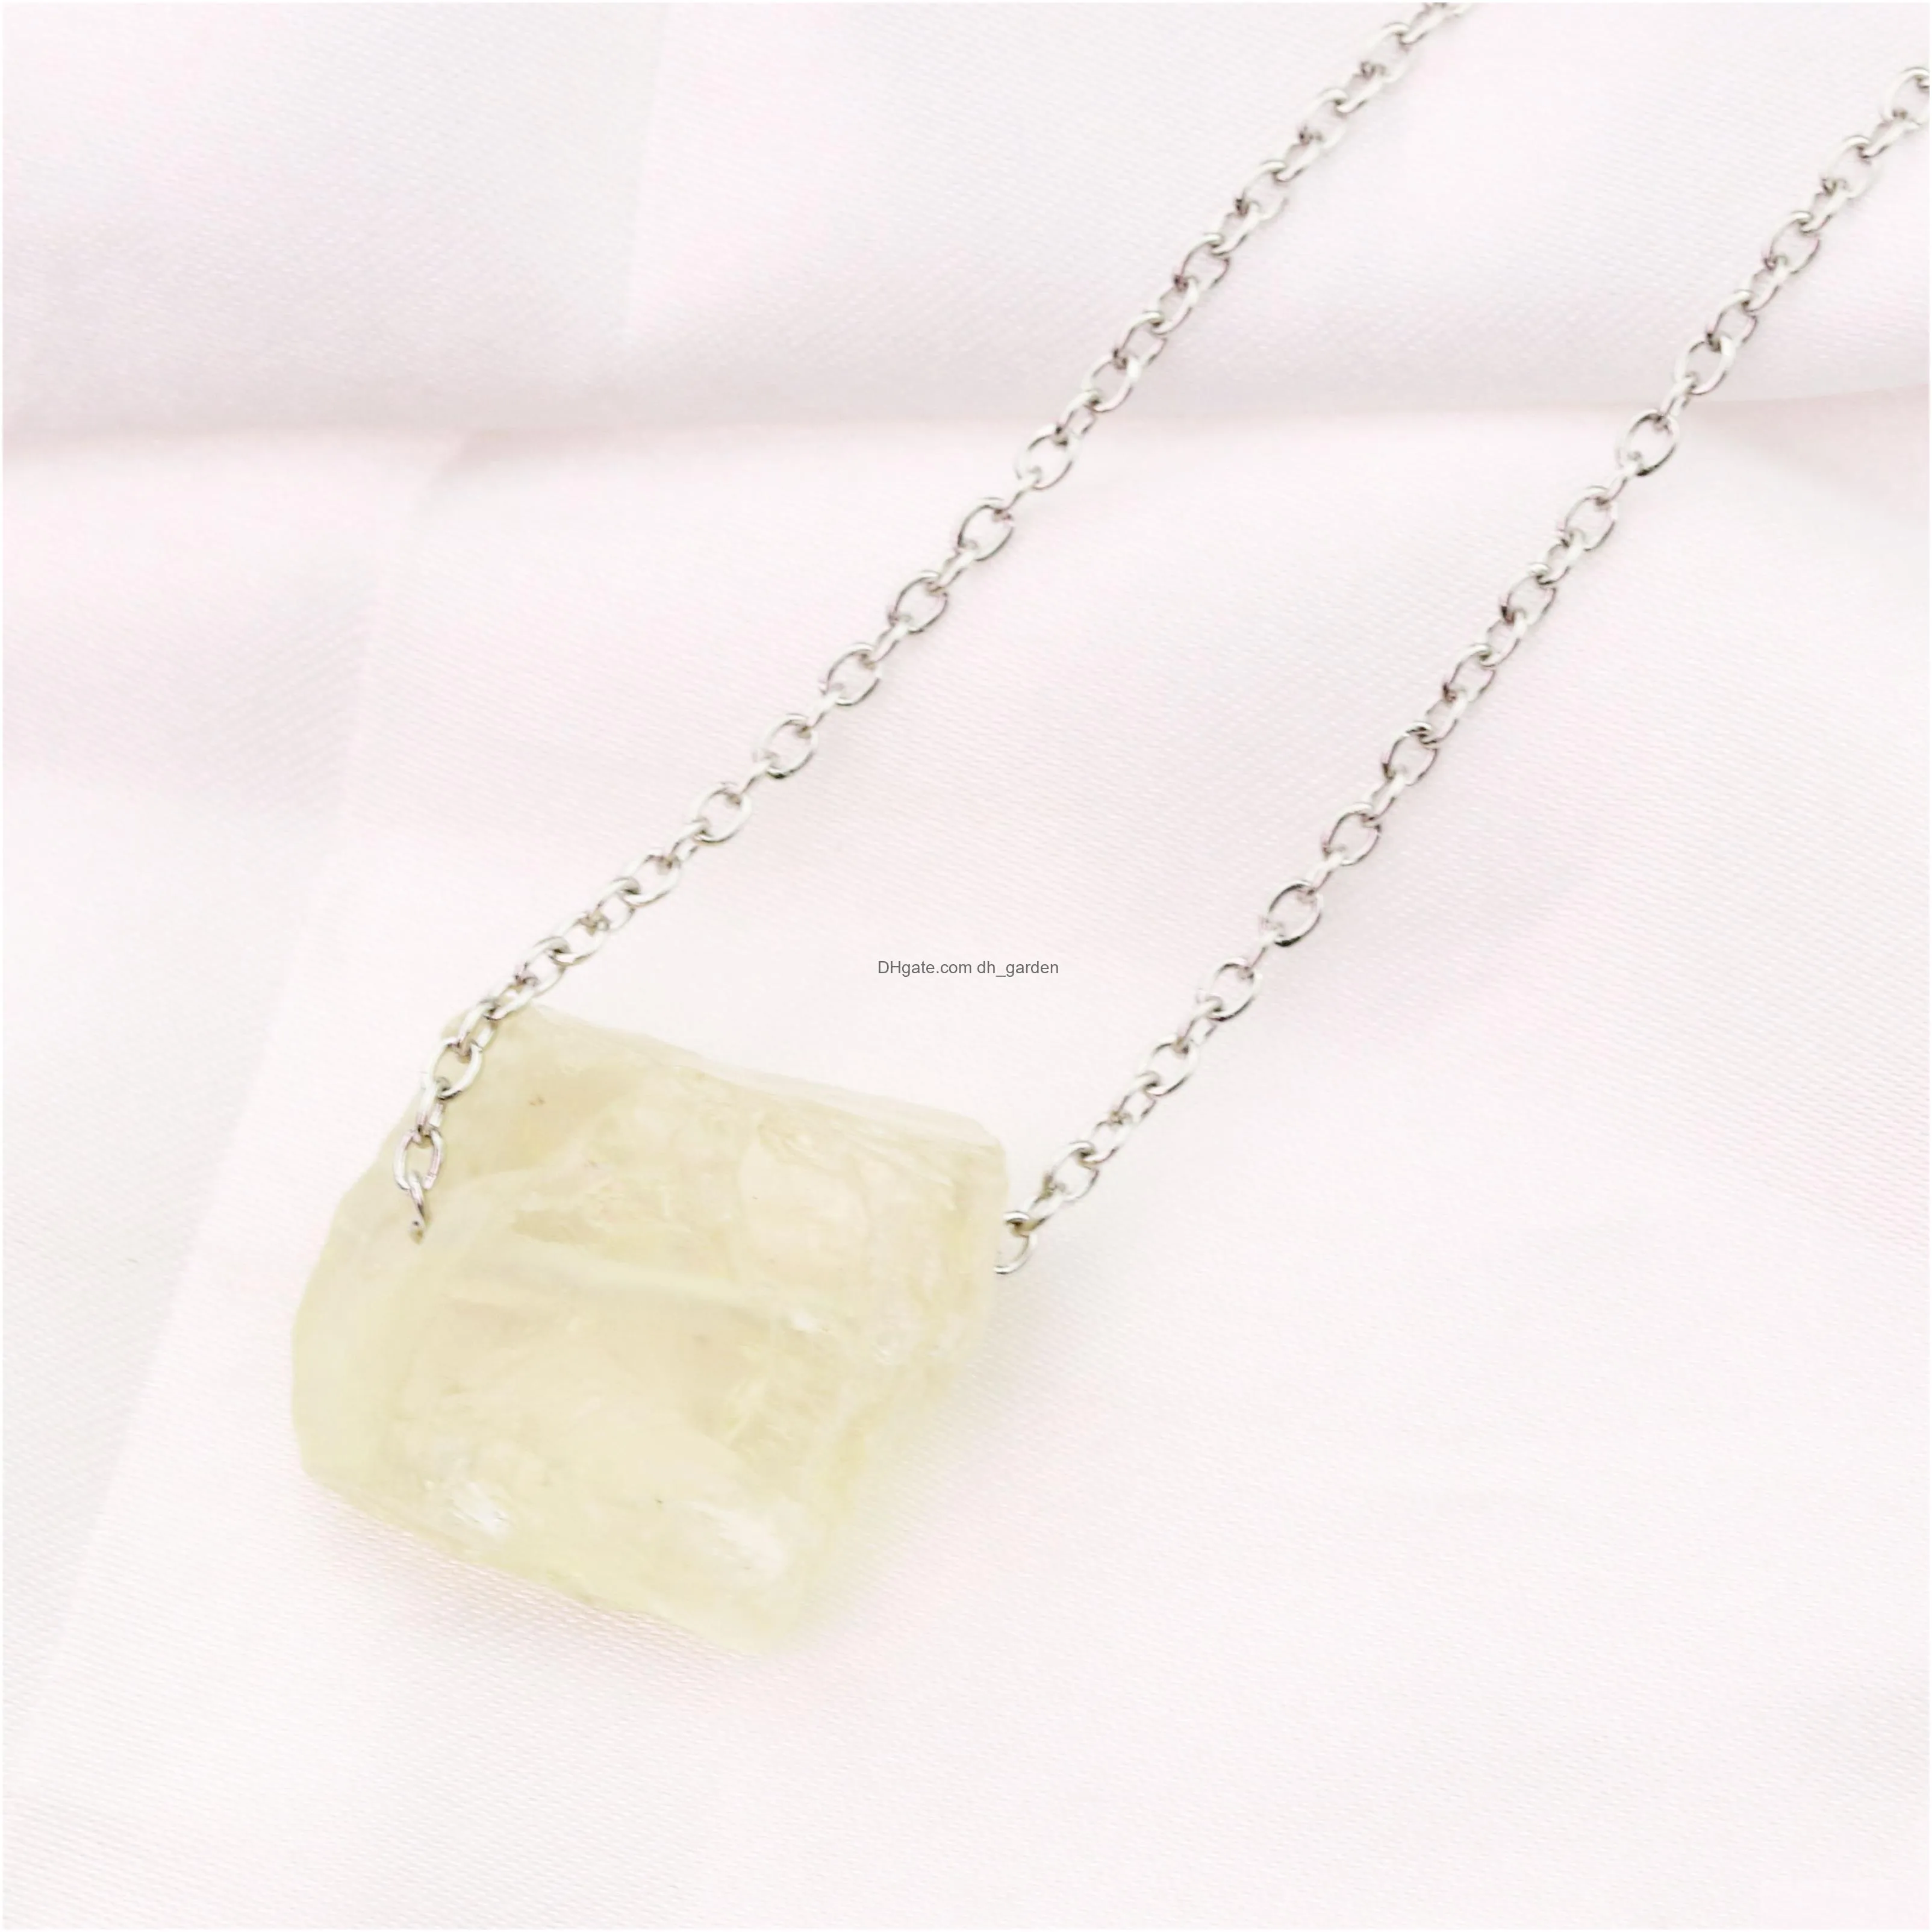 natural raw stone amethyst fluorite pendant irregular citrine pink crystal necklace for women jewelry